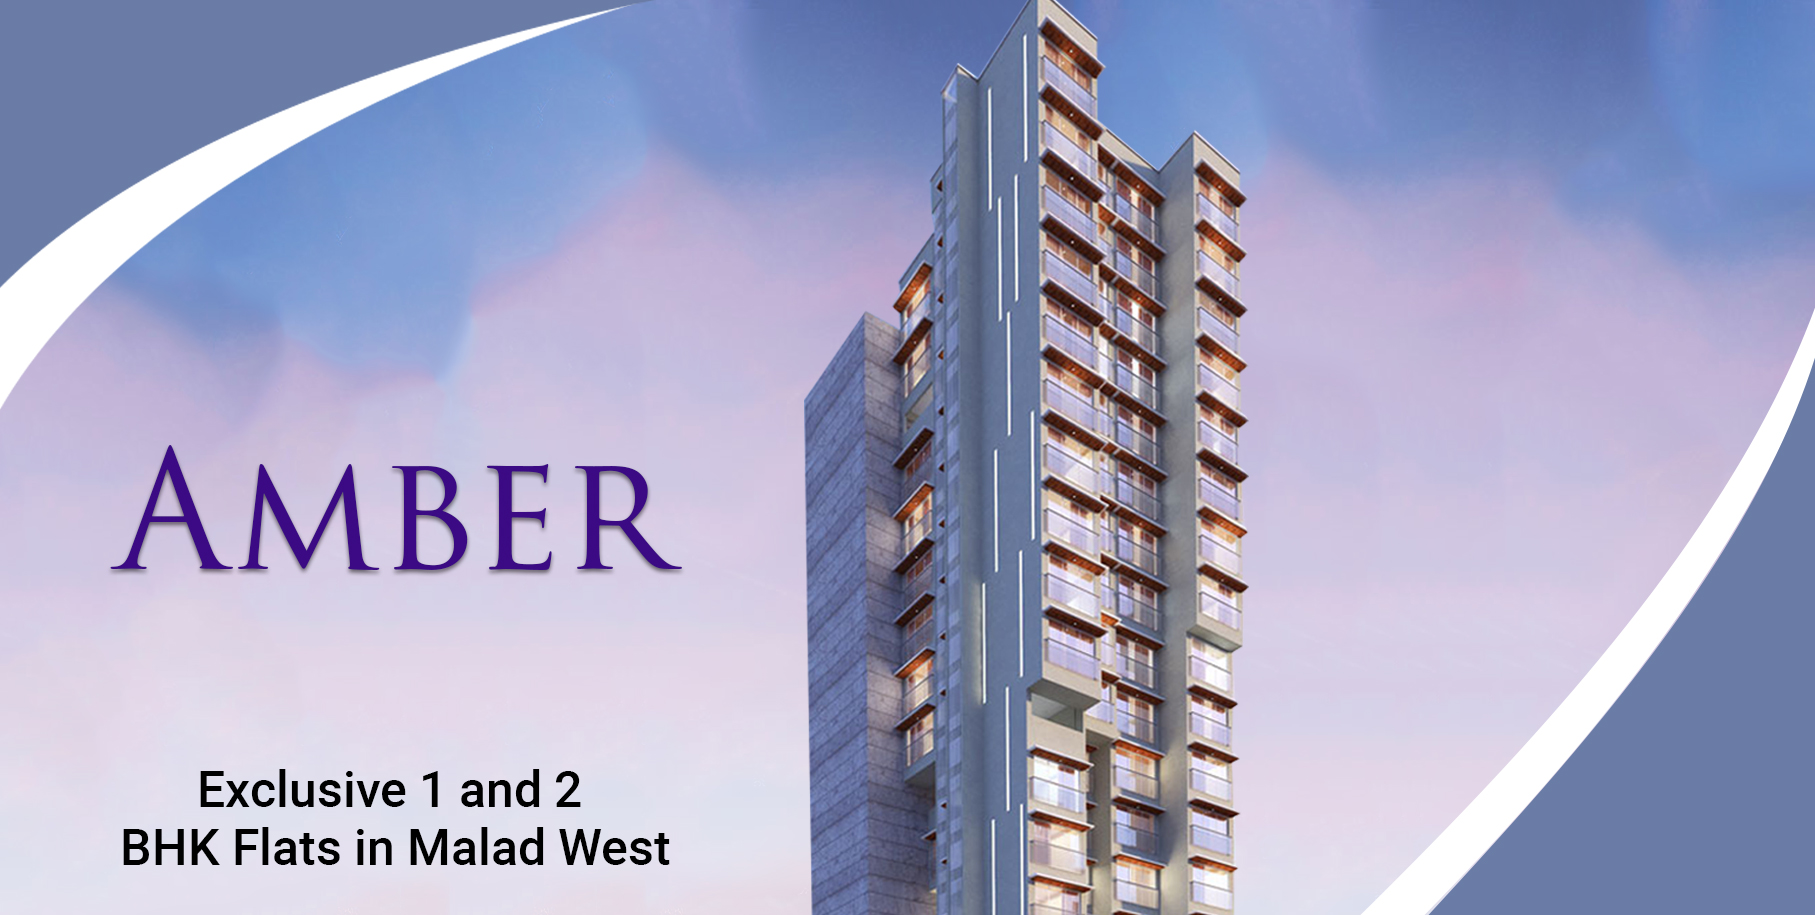 Amber – Exclusive 1 and 2 BHK Flats in Malad West